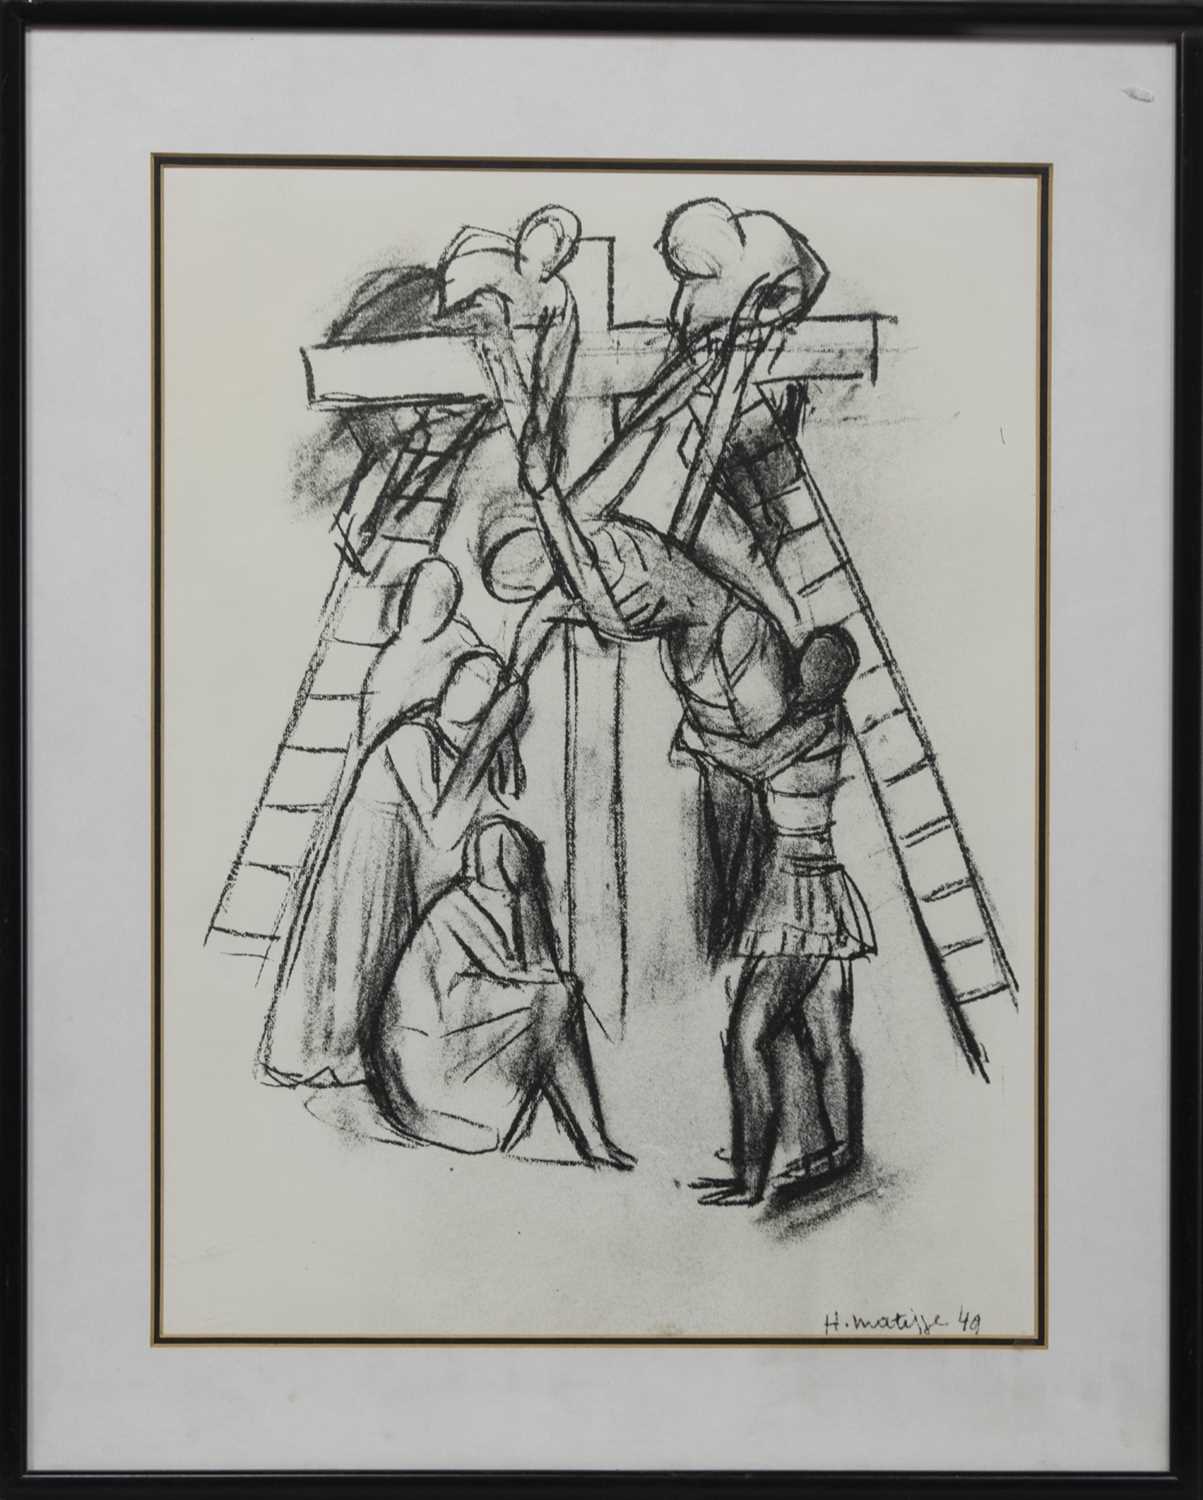 Lot 34 - FROM STATIONS OF THE CROSS, A LITHOGRAPH AFTER HENRI MATISSE